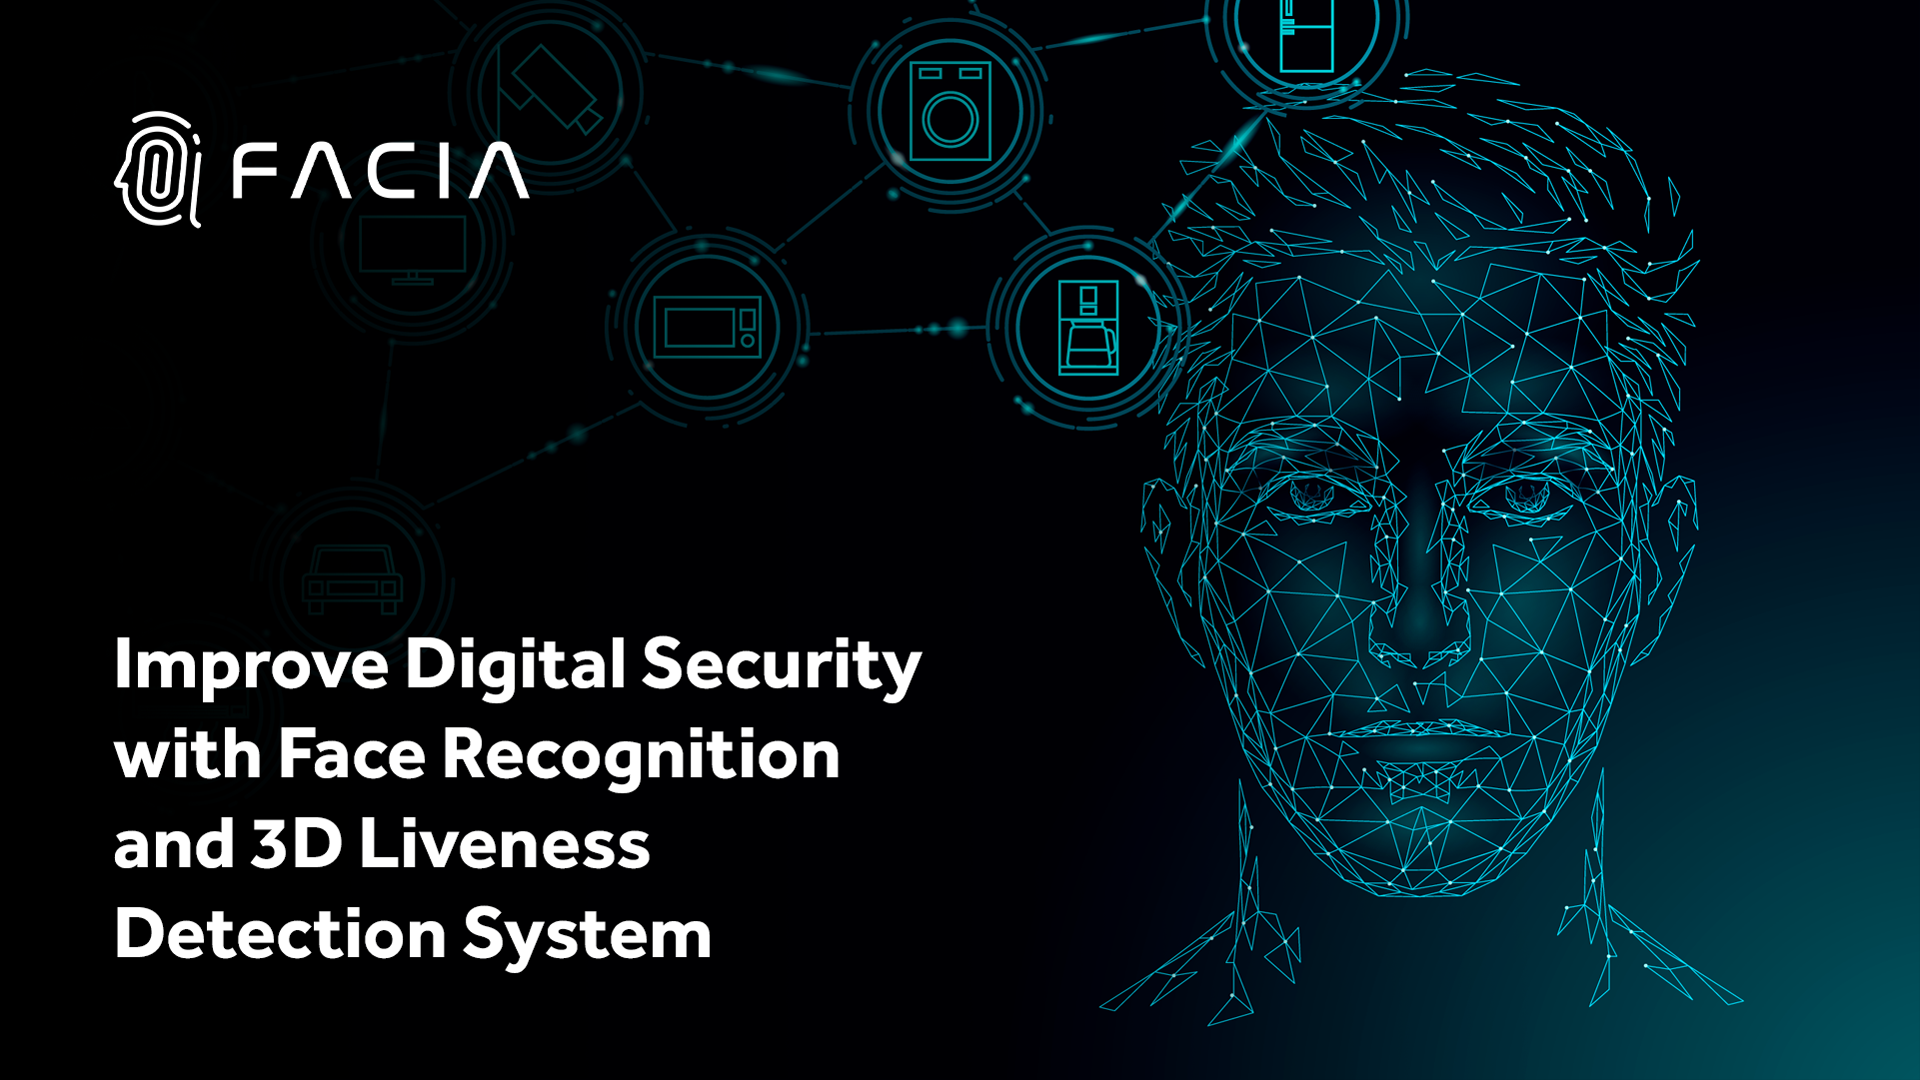 Improve Digital Security with Face Recognition and 3D Liveness Detection System